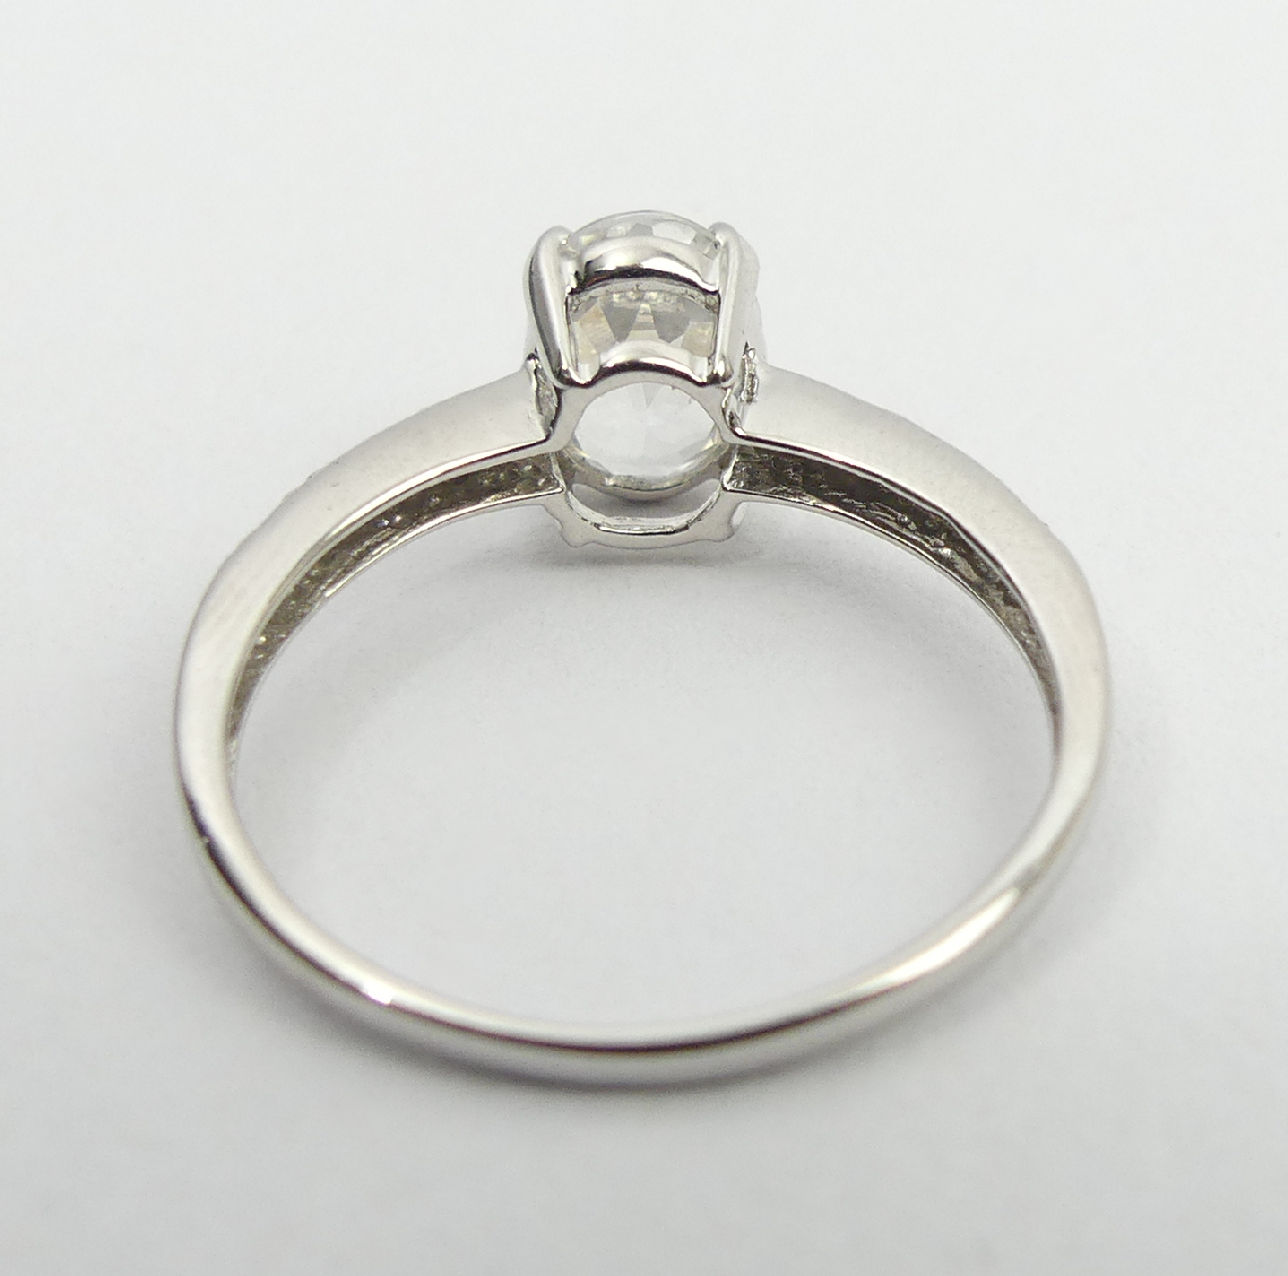 9ct white gold topaz and diamond ring, 1.9 grams, 8mm, size N1/2. UK Postage £12. - Image 5 of 6